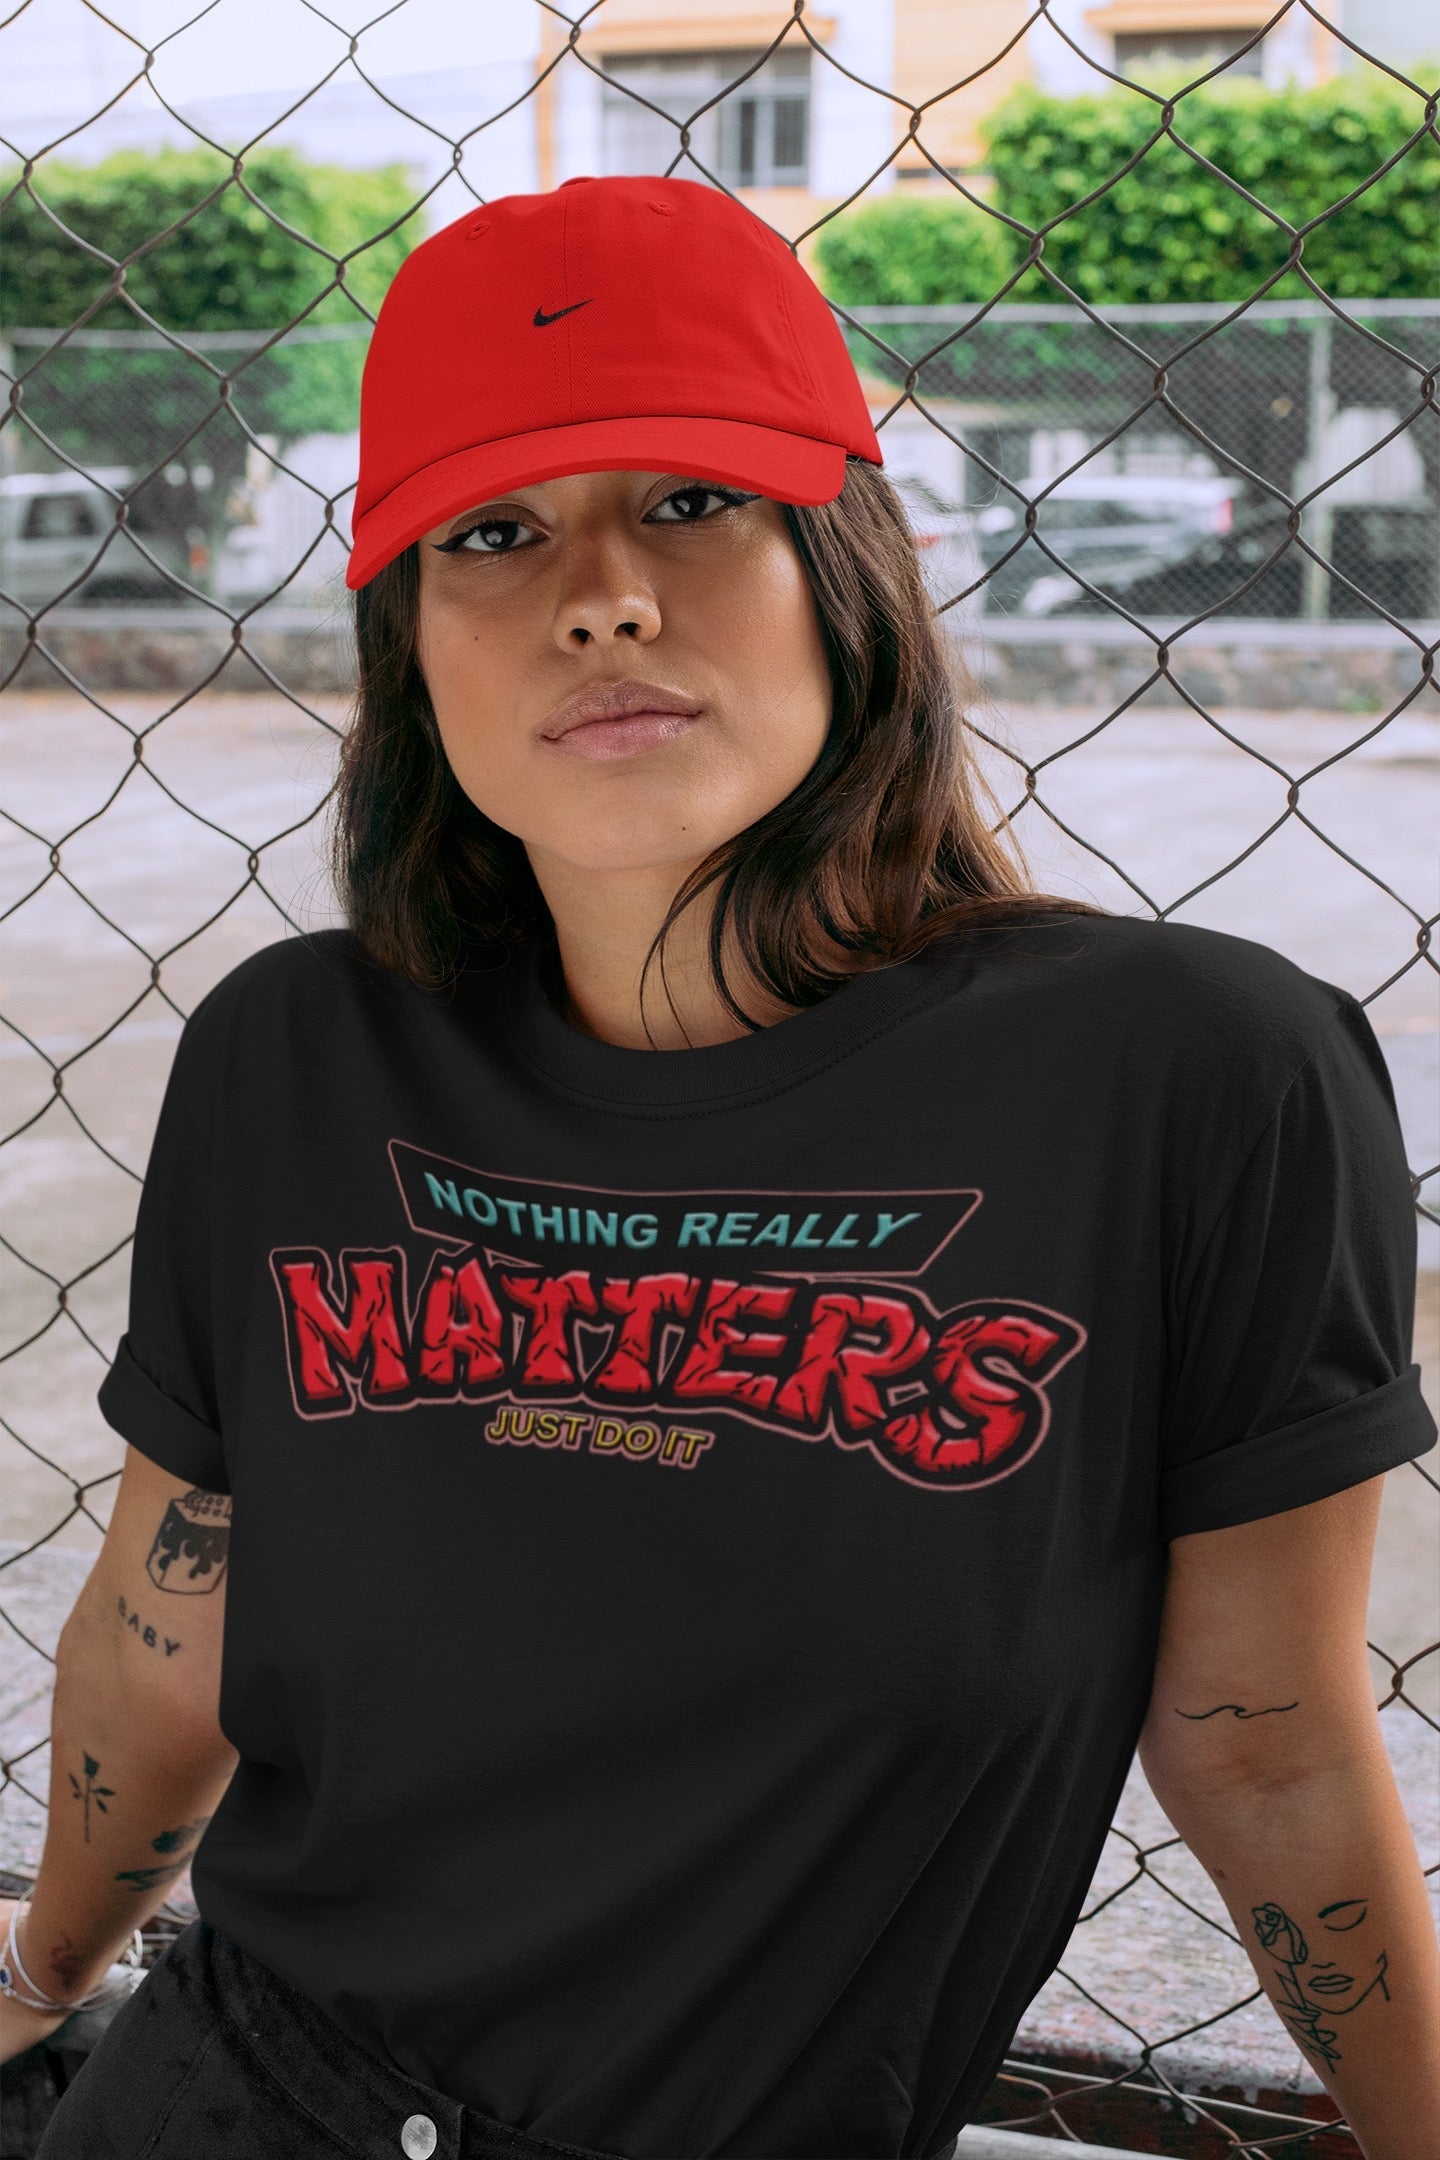 Yeezy 700 Hi-Res Red Sneaker Match Tees Nothing Matters Sneaker Tees Yeezy 700 Hi-Res Red Sneaker Release Tees Unisex Shirts